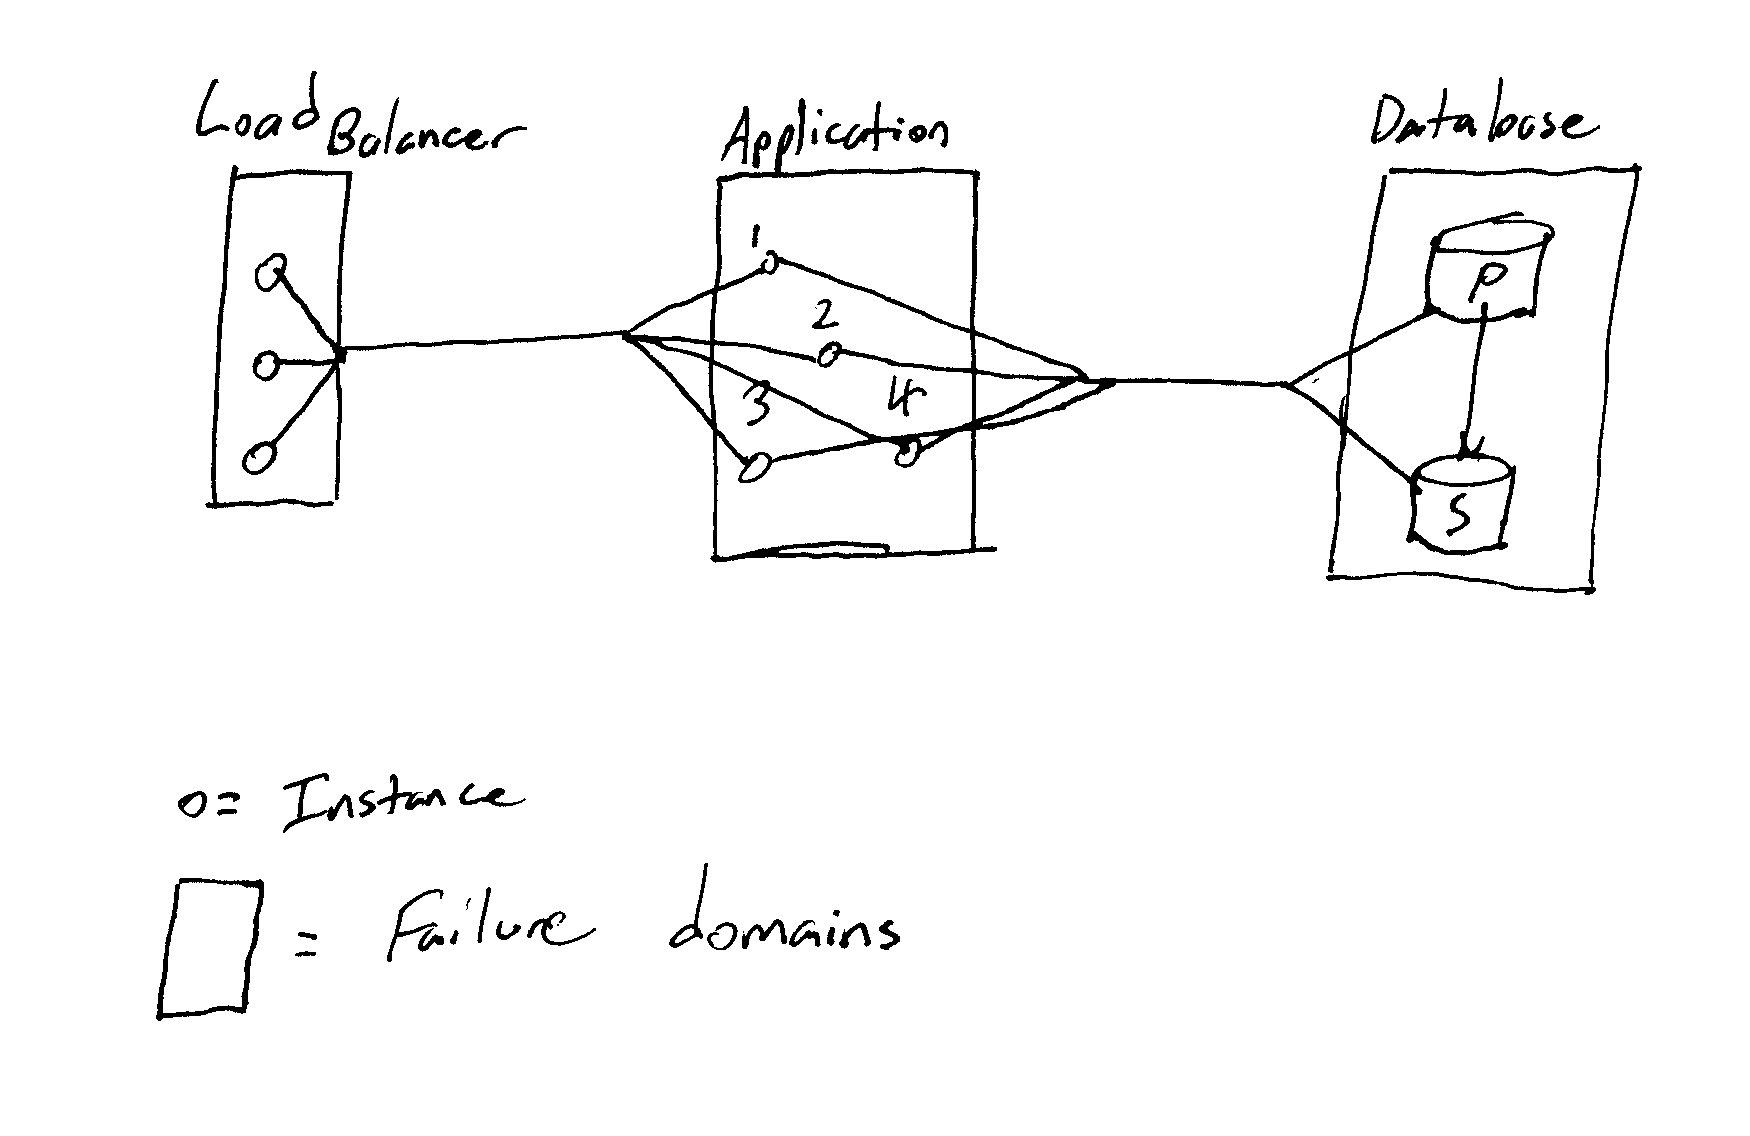 A somewhat typical application
architecture